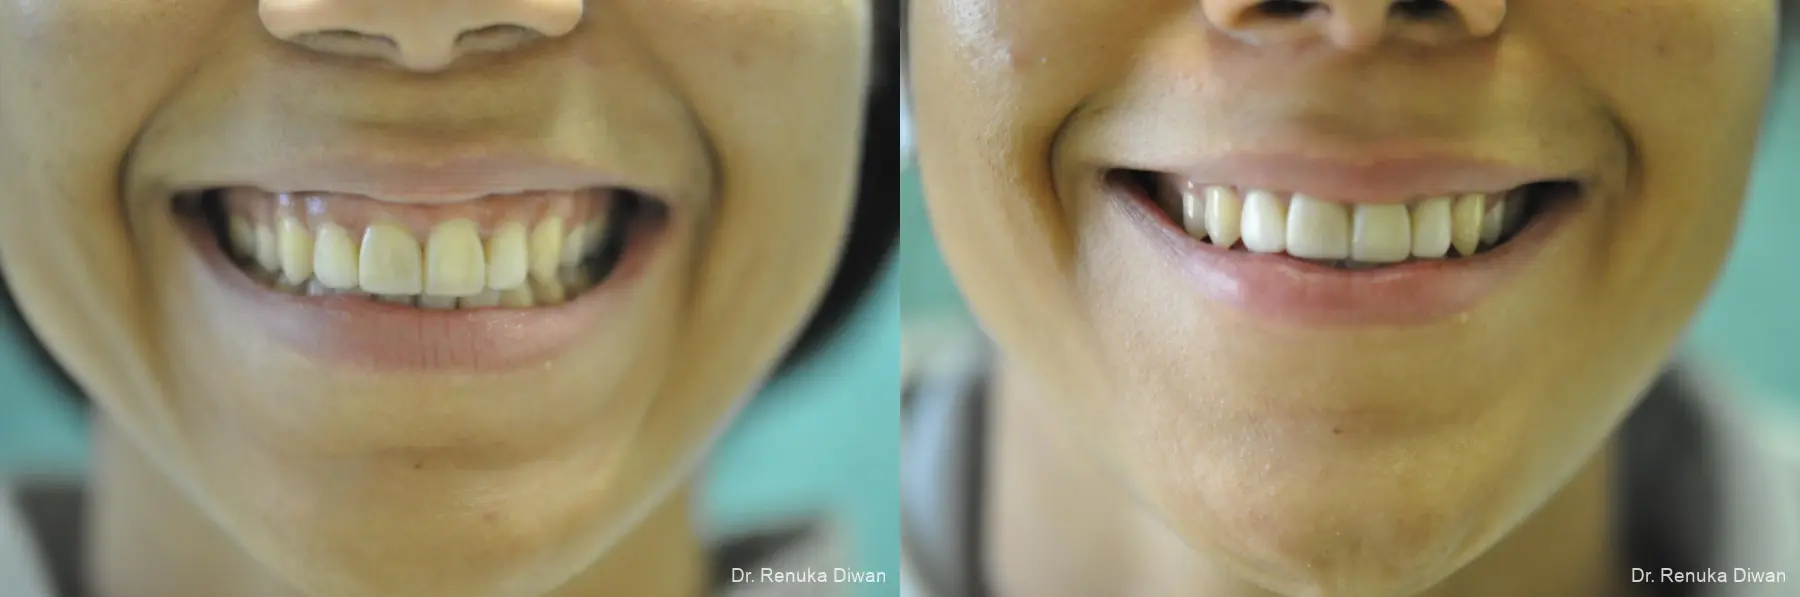 Gummy Smile: Patient 3 - Before and After 1